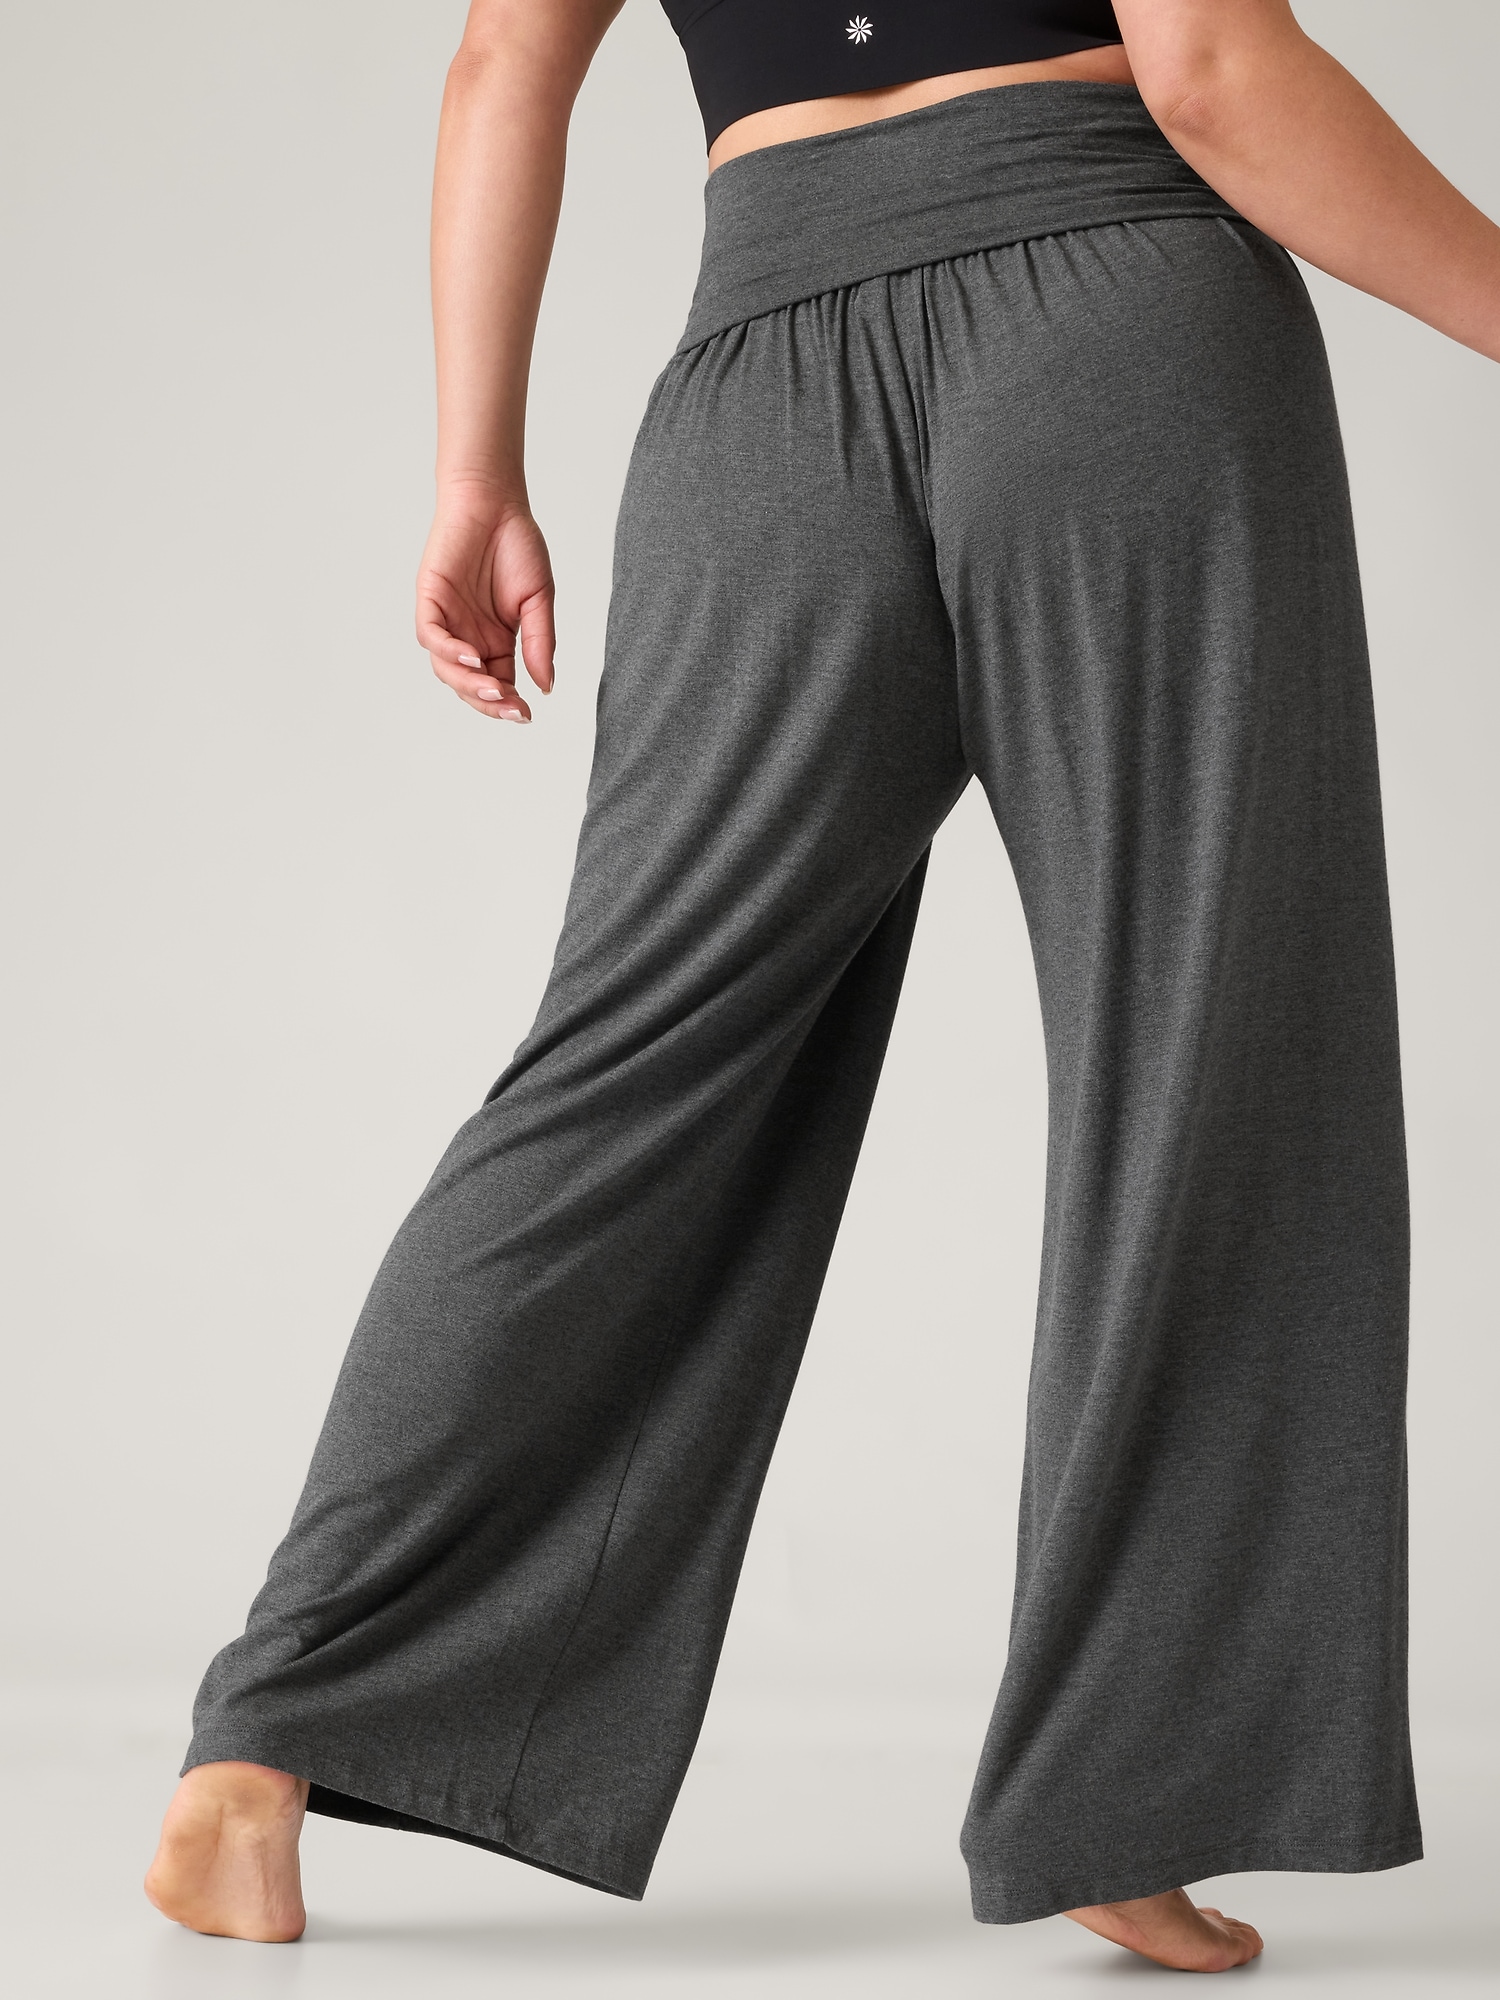 Lululemon On The Fly Pants Gray Size 4 27” Inseam